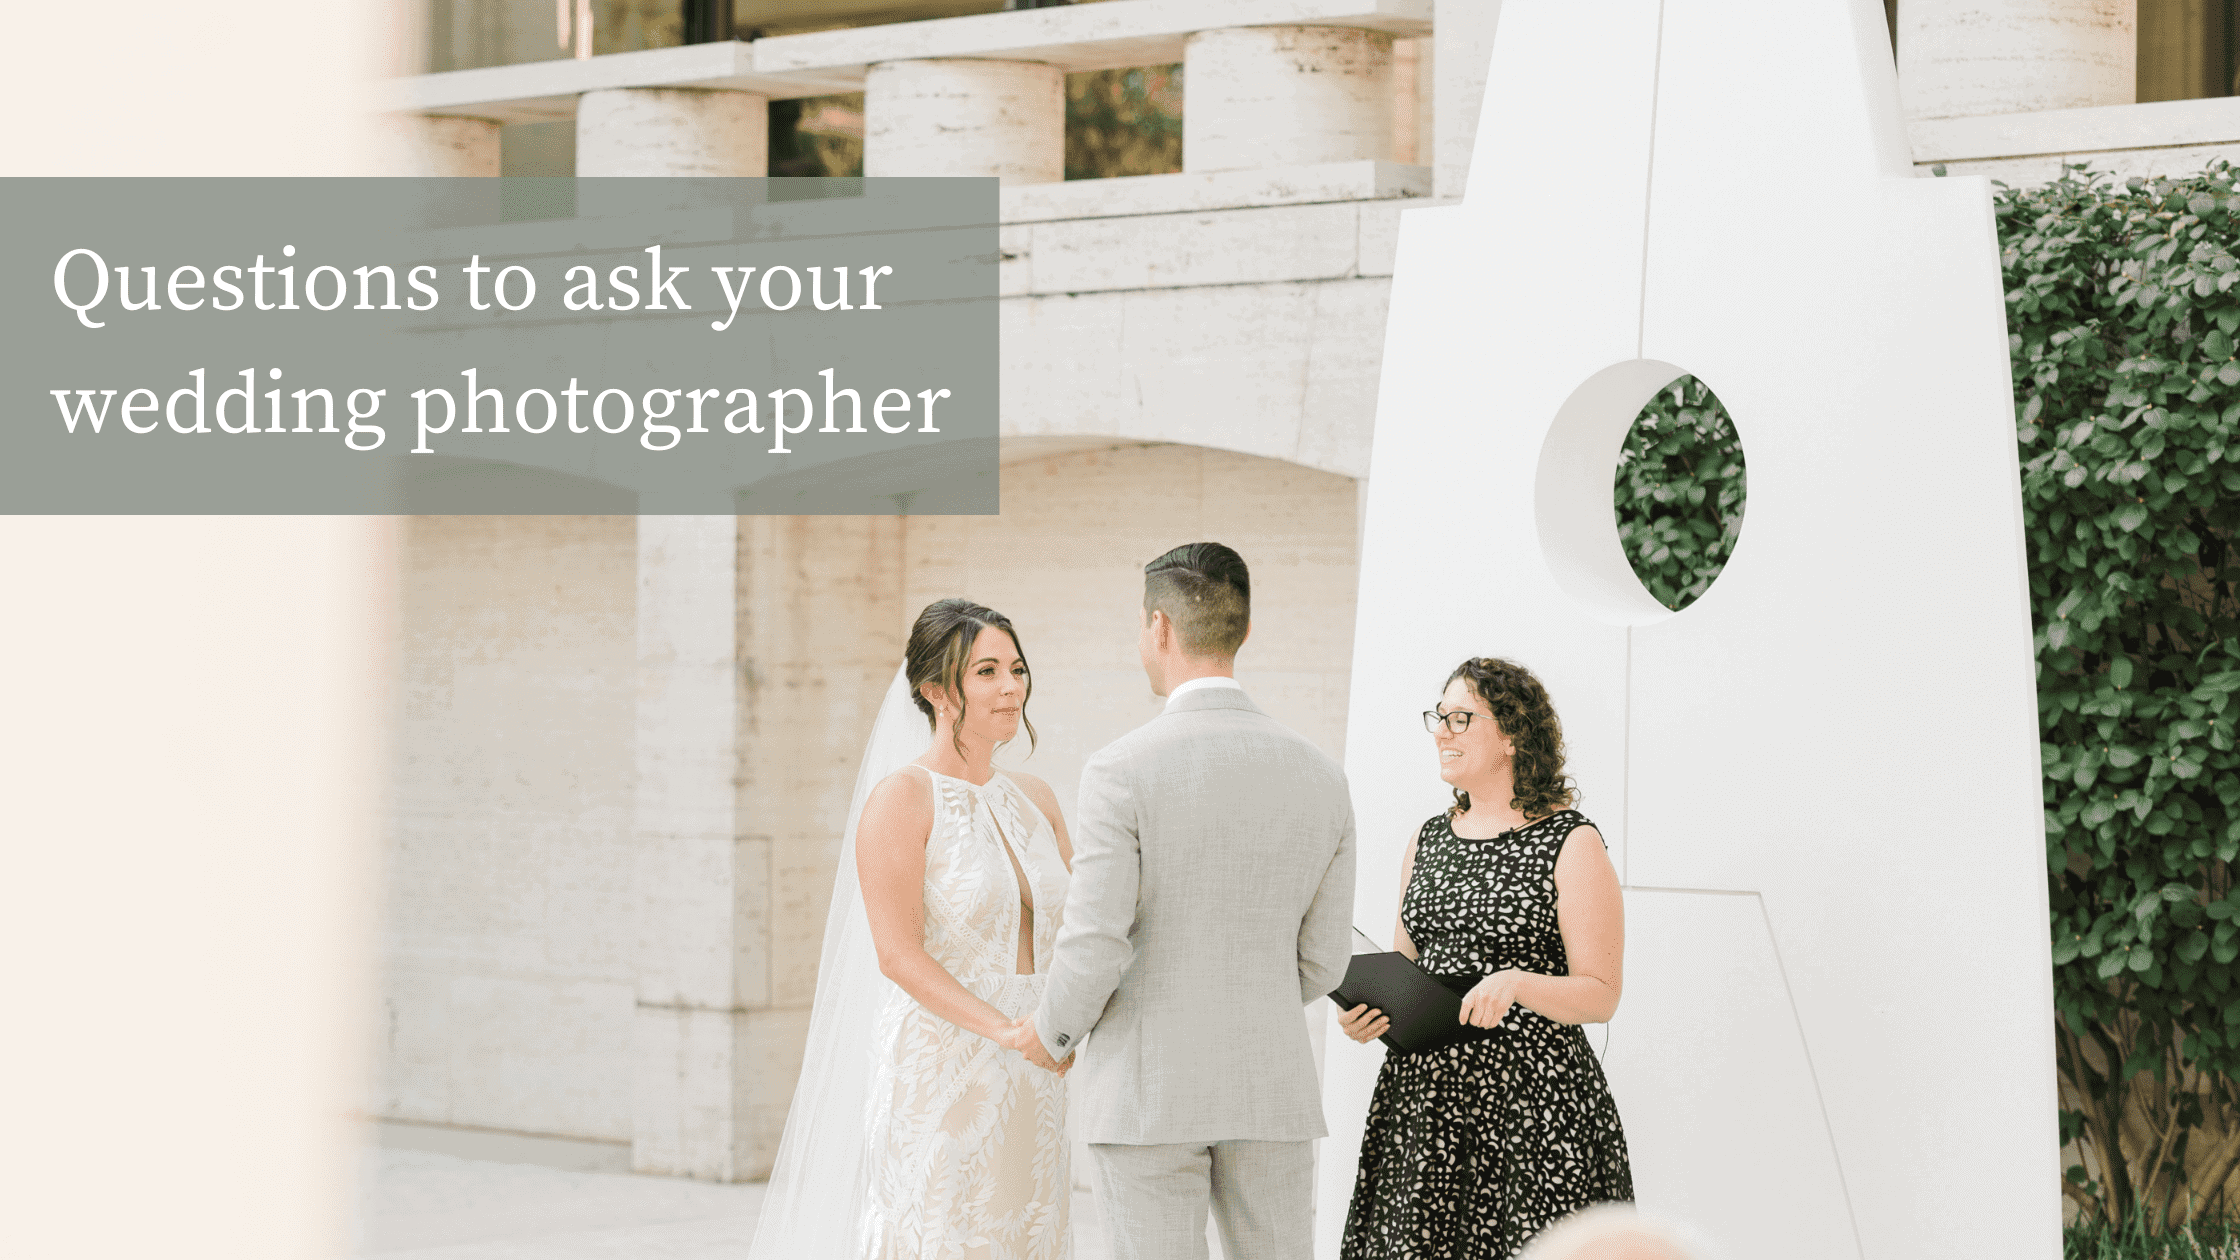 Surrounded by sunlight pouring in the beautiful white courtyard of the Kreeger Museum in Washington DC, a bride holds her partners hand and says her vows to him. The text overlay on the left reads: 